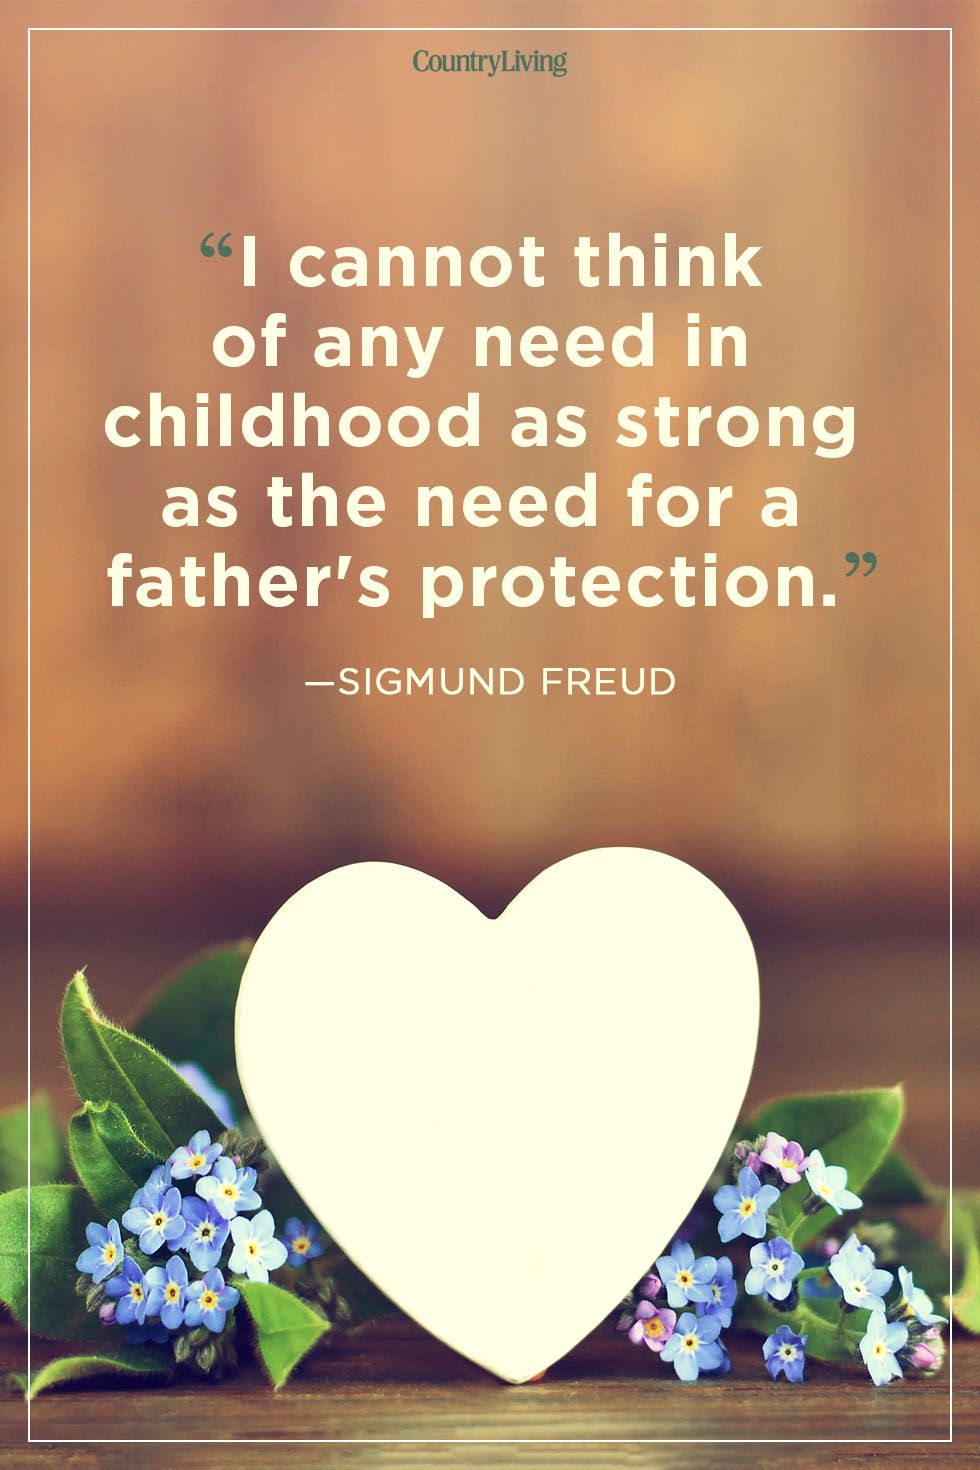 i cannot think of any need in childhood as strong as the need for a father’s protection. sigmund freud